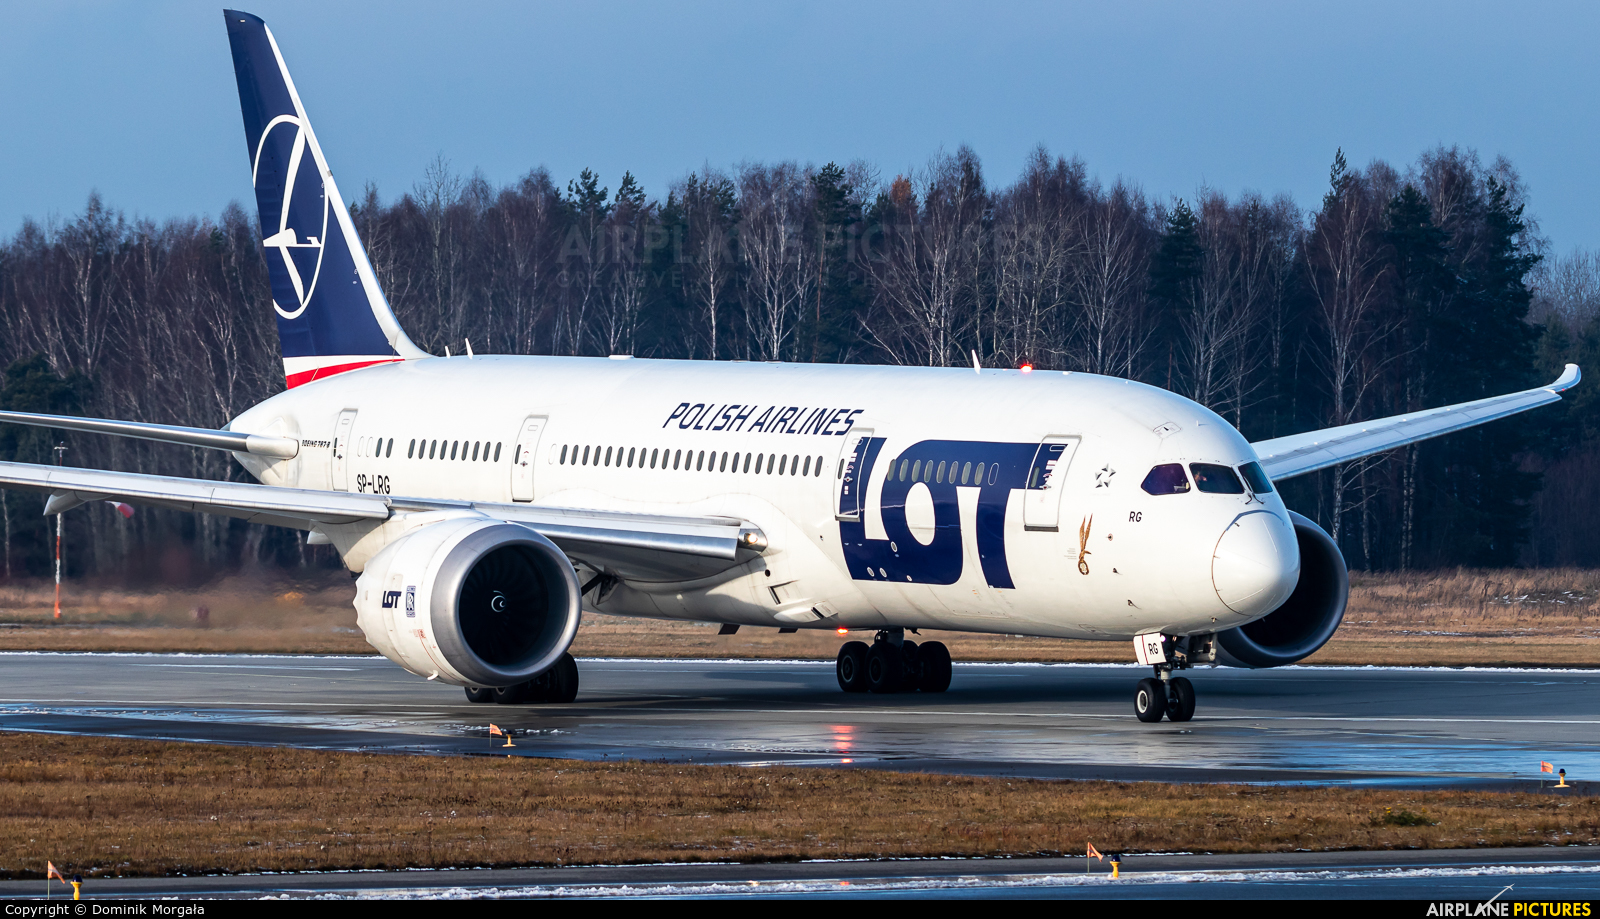 LOT - Polish Airlines SP-LRG aircraft at Katowice - Pyrzowice